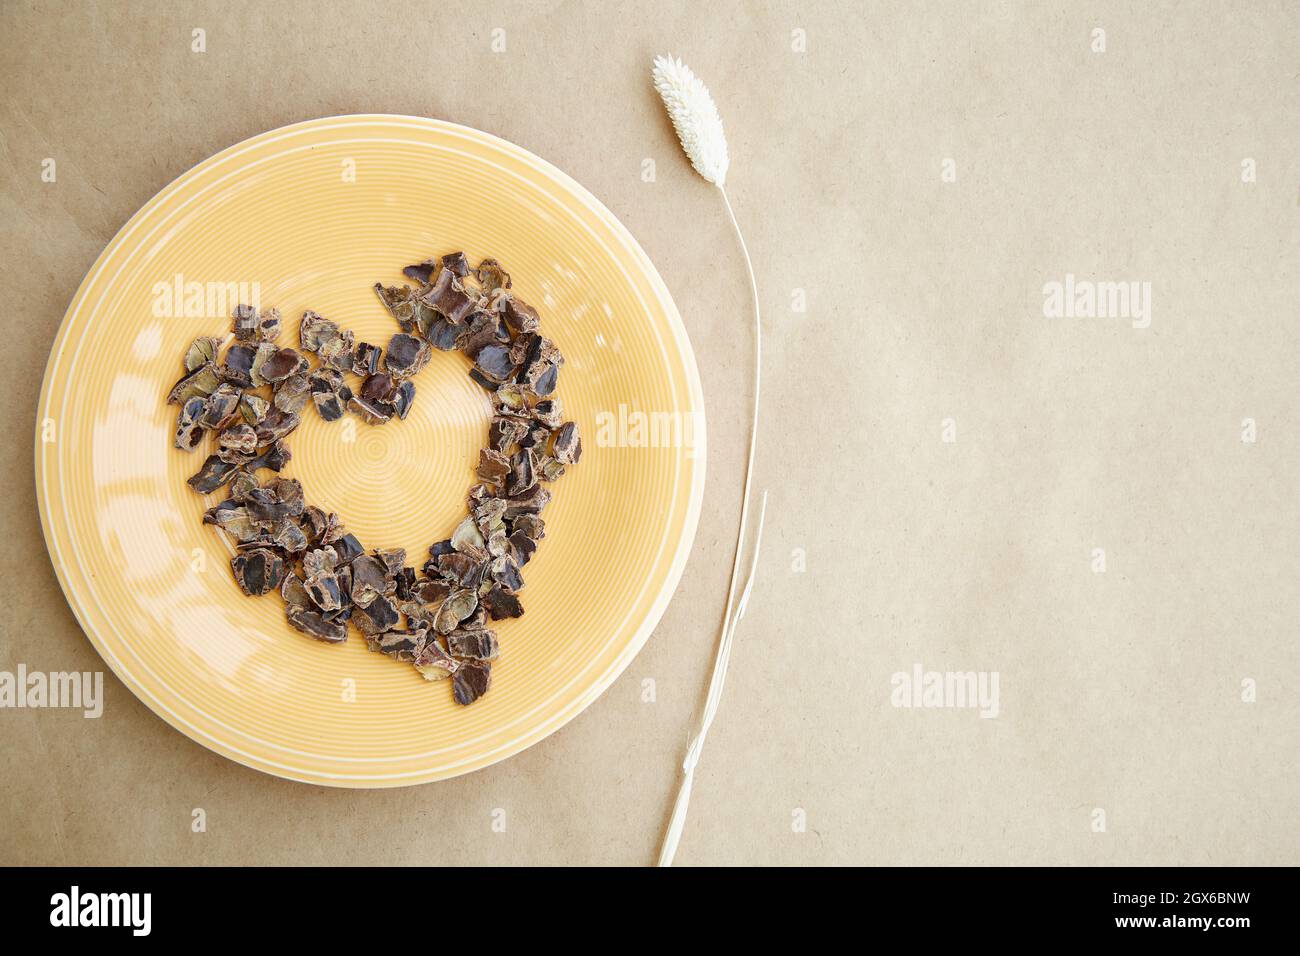 Carob - plant-based alternative - natural product on the plate in a shape of heart with dry Lagurus ovatus grass. Organic antioxidants and protein. To Stock Photo